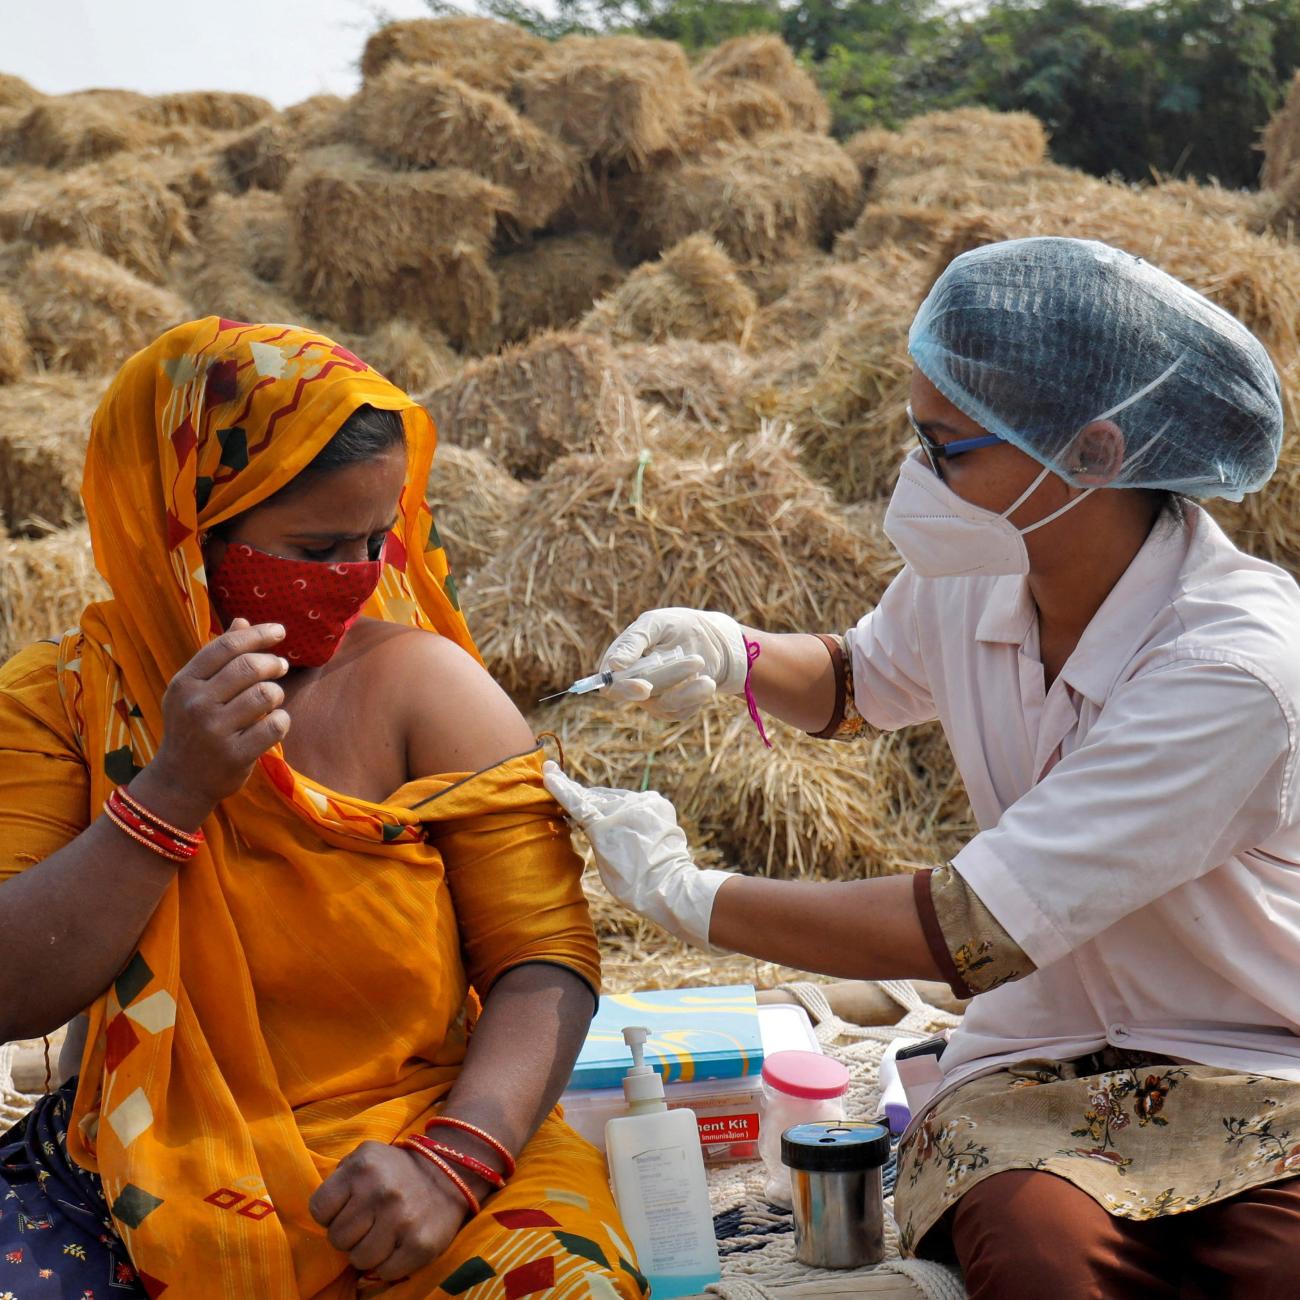 A woman receives a dose of COVISHIELD vaccine against COVID-19, that's manufactured by Serum Institute of India.